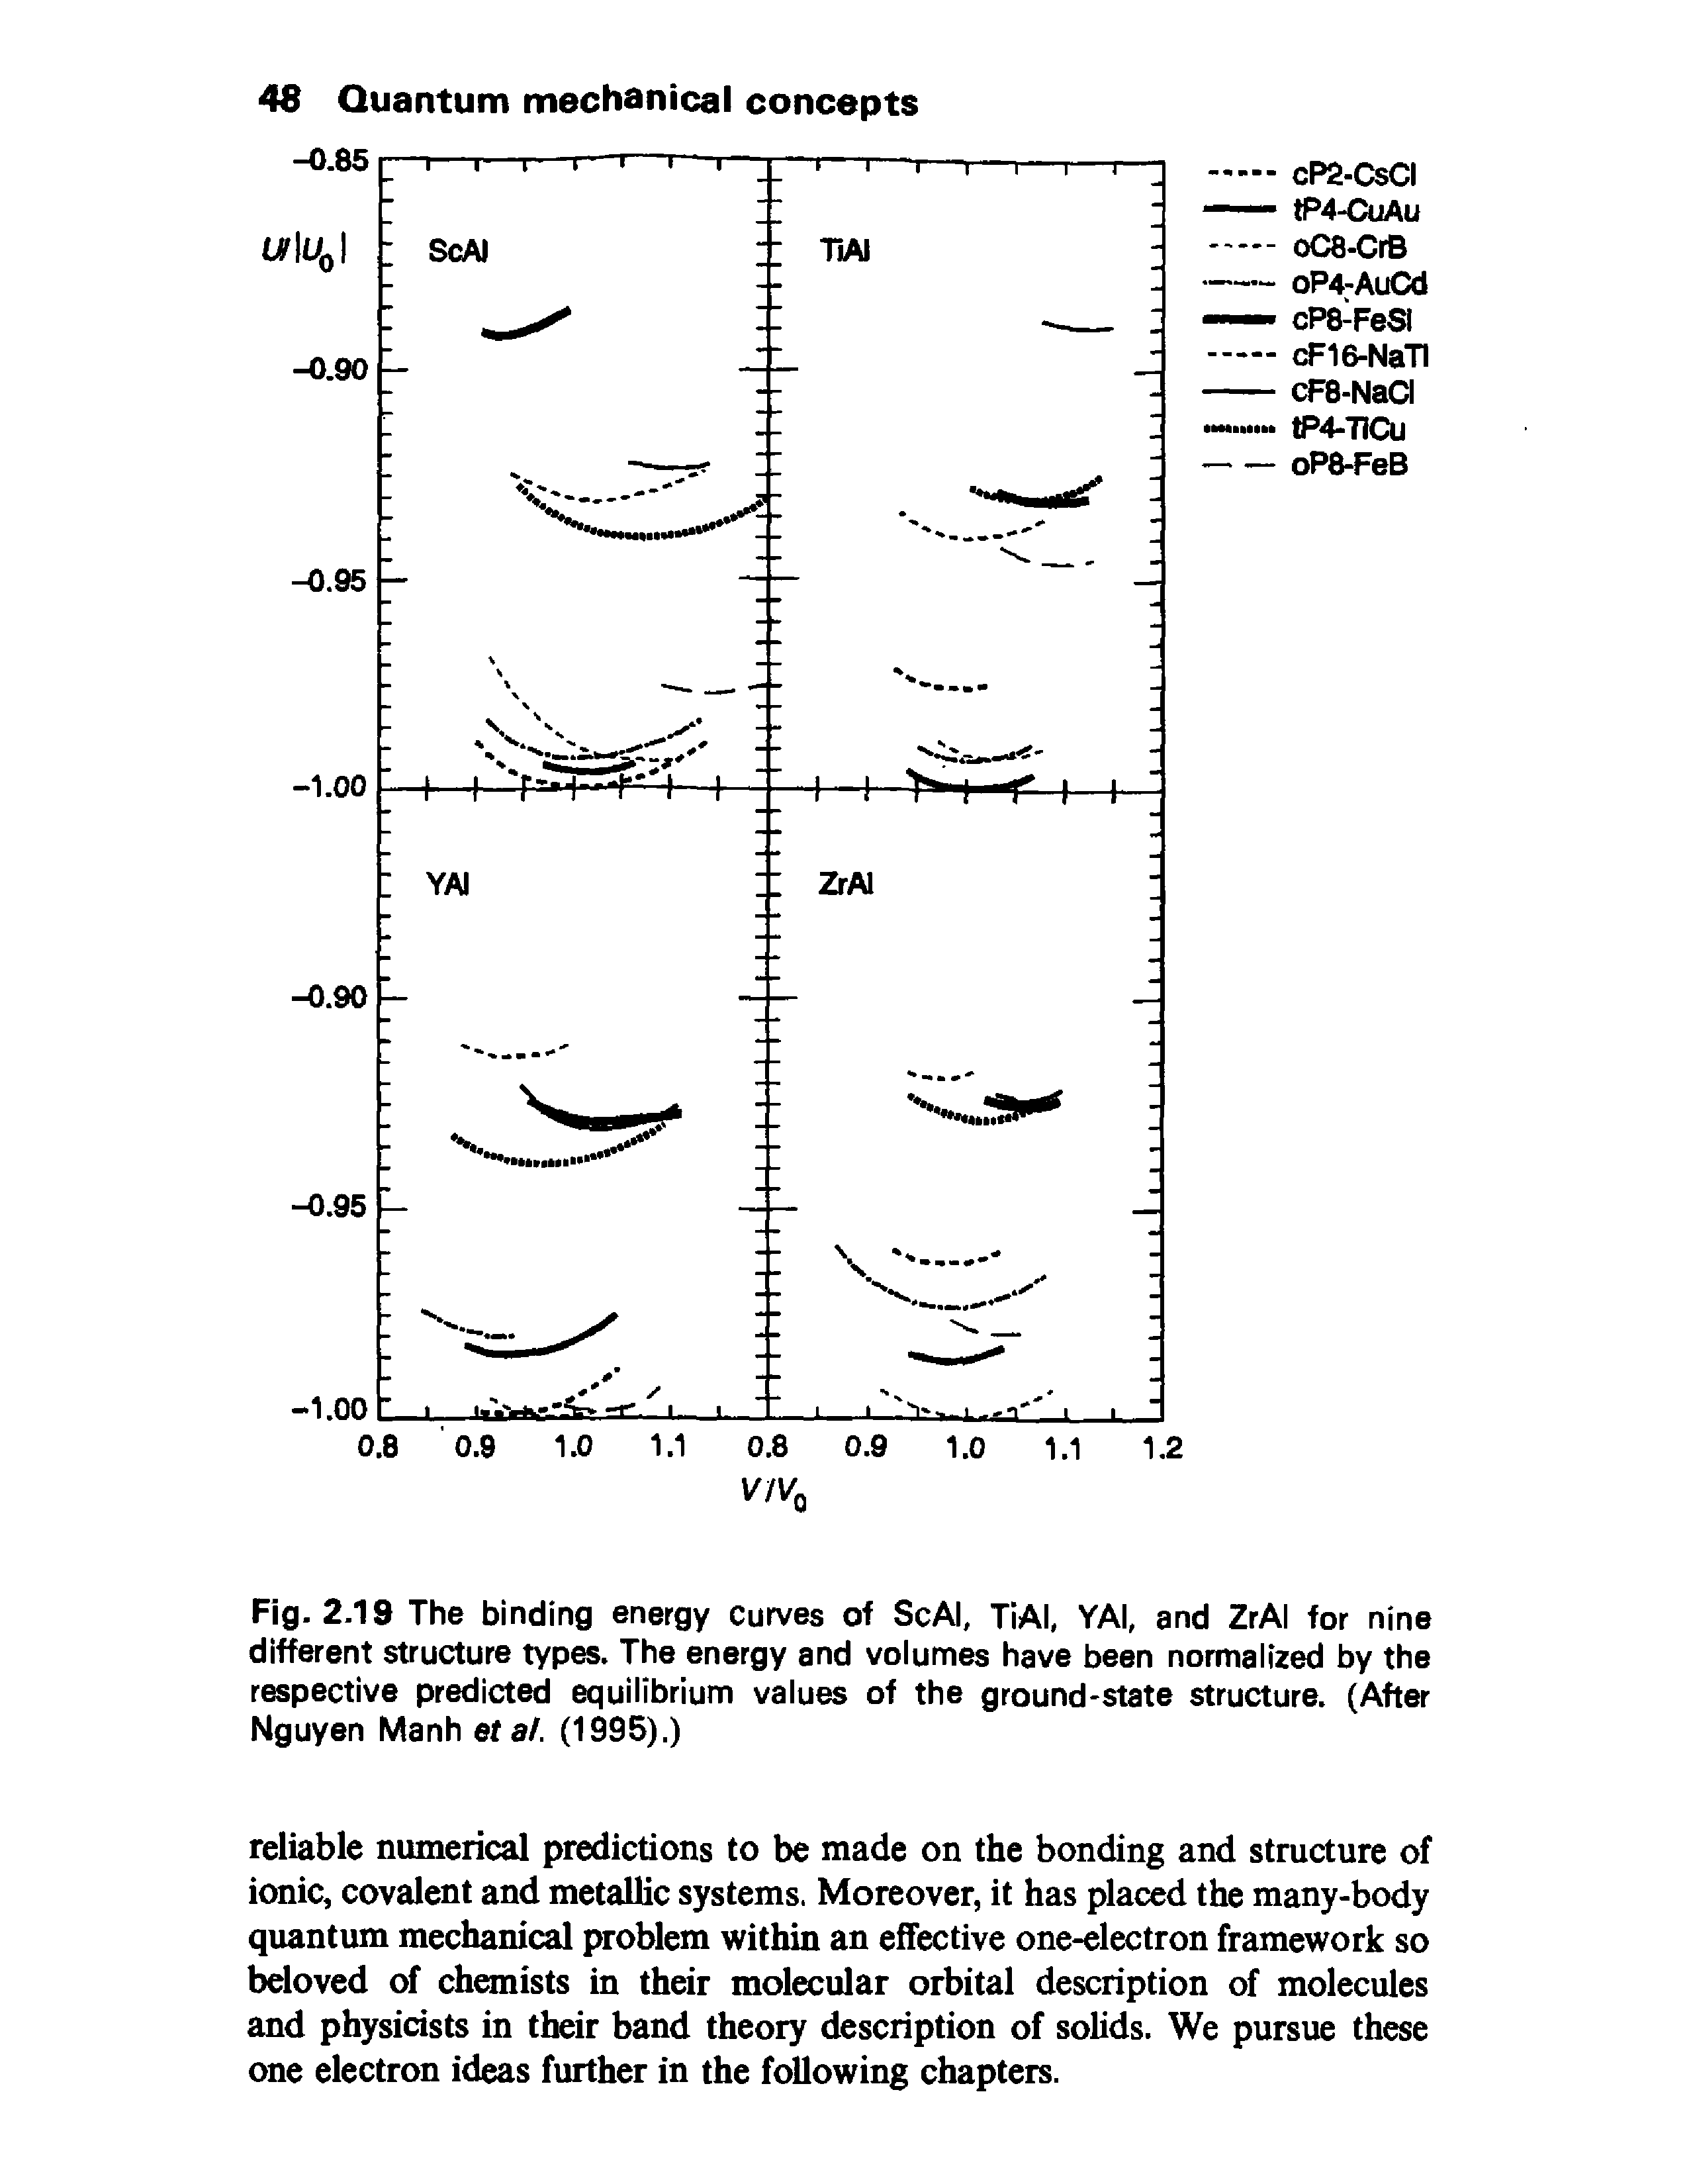 Fig. 2.19 The binding energy curves of ScAl, TiAl, YAI, and ZrAI for nine different structure types. The energy and volumes have been normalized by the respective predicted equilibrium values of the ground-state structure. (After Nguyen Manh eta/. (1995).)...